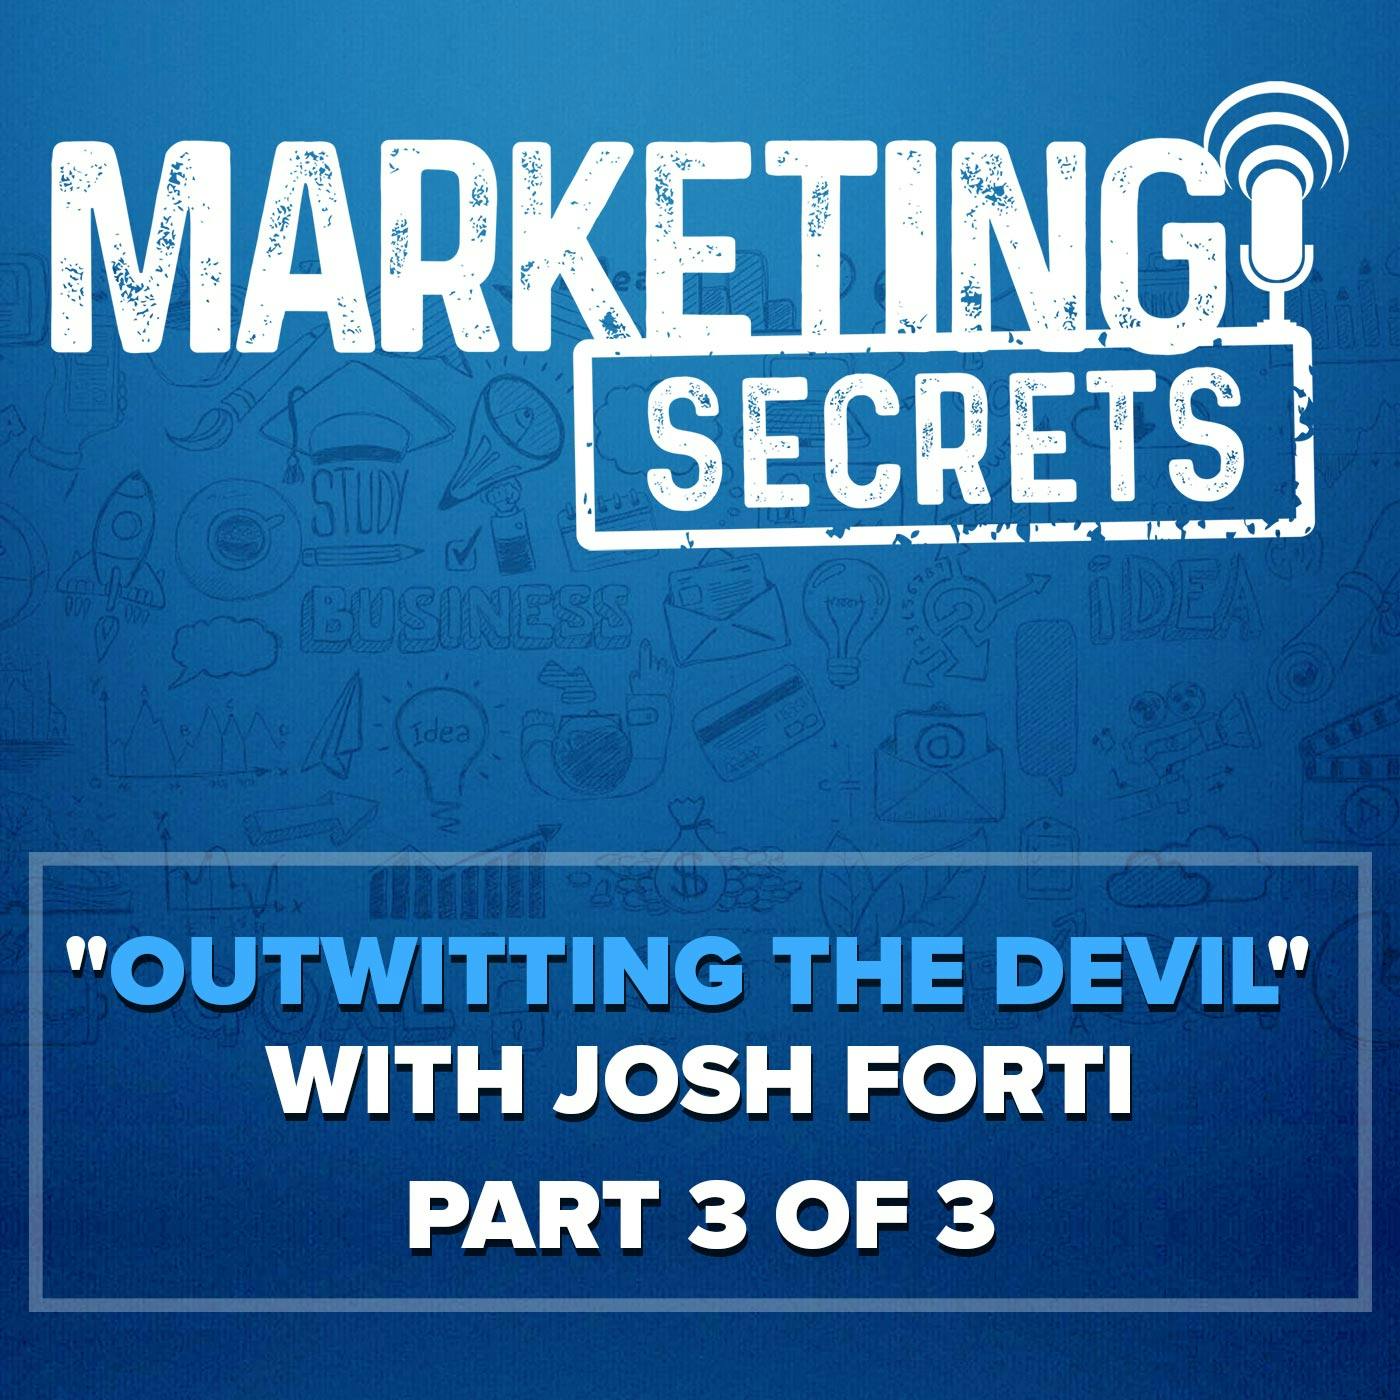 "Outwitting The Devil" with Josh Forti - Part 3 of 3